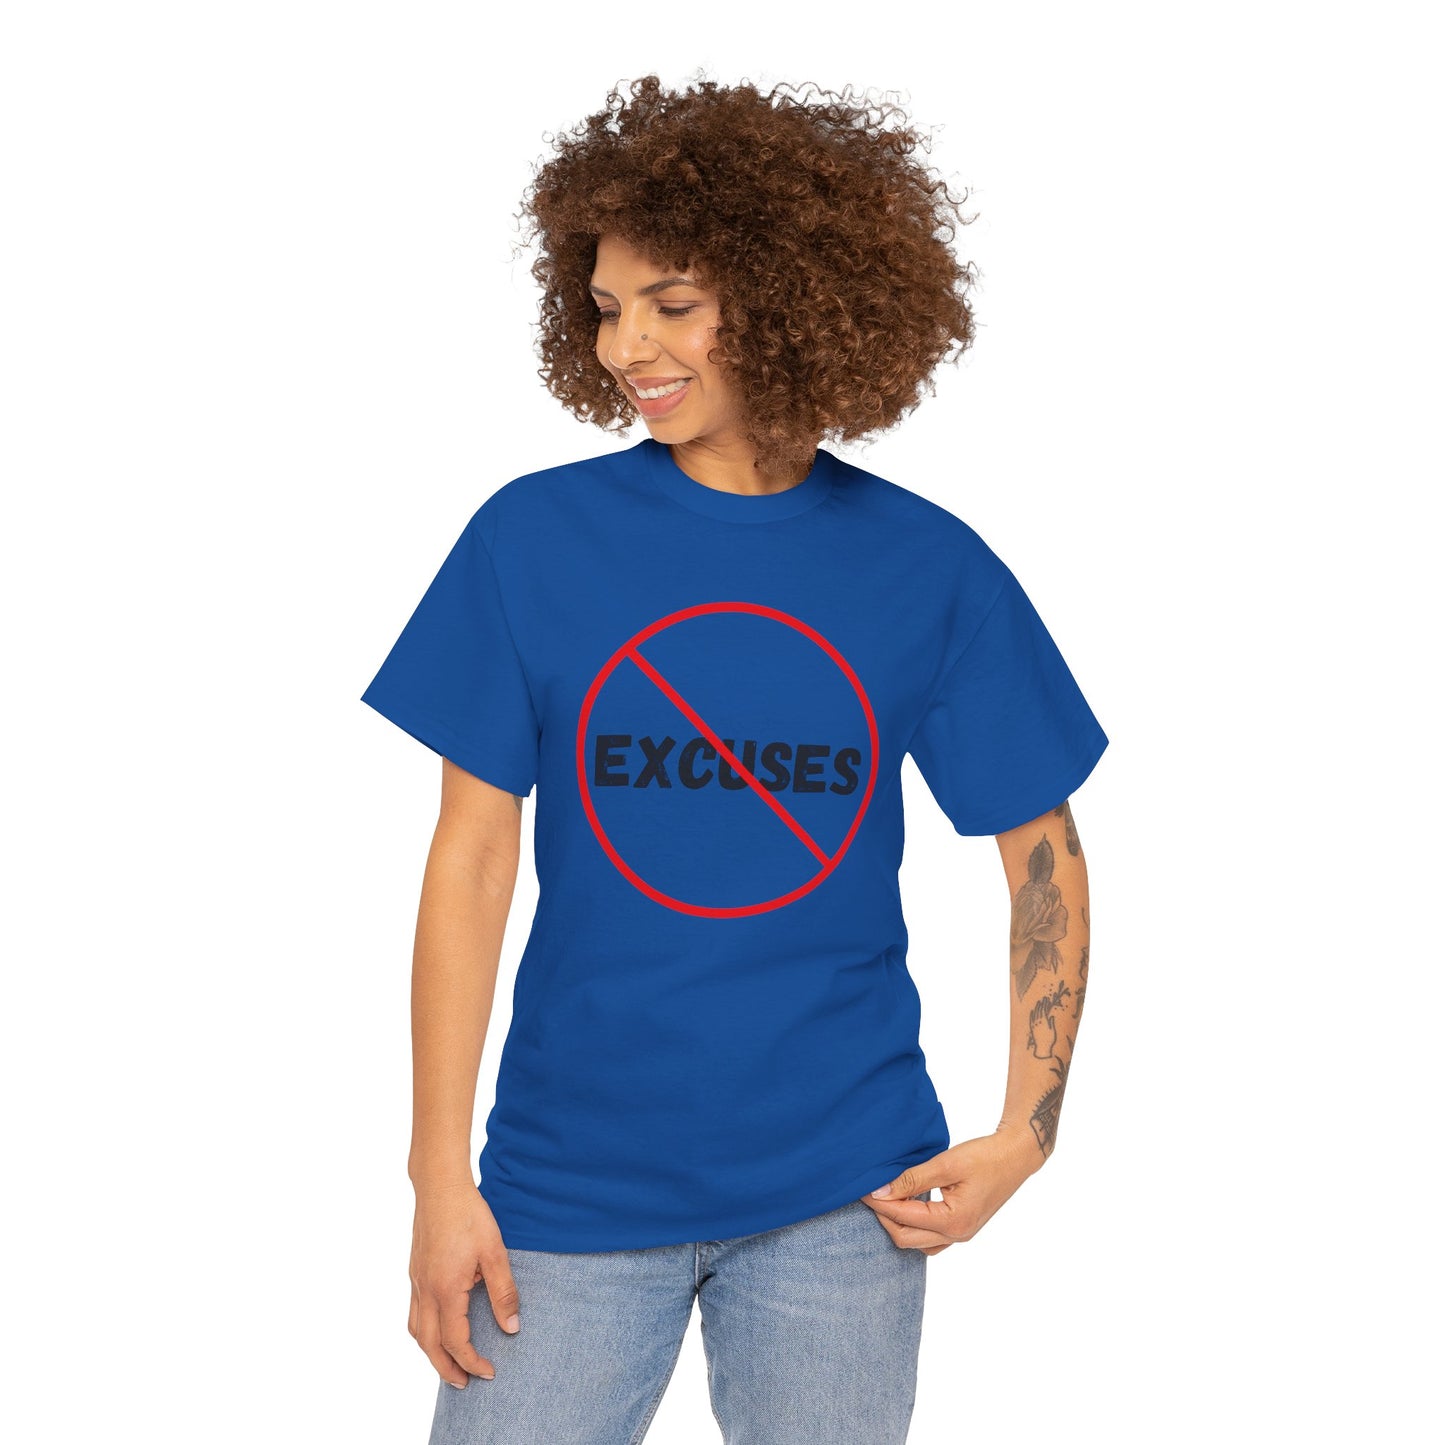 No Excuses T-Shirt, Gamer Tee 100% Cotton, 6 Colours, AUS - USA - CAN warehouse, free post.